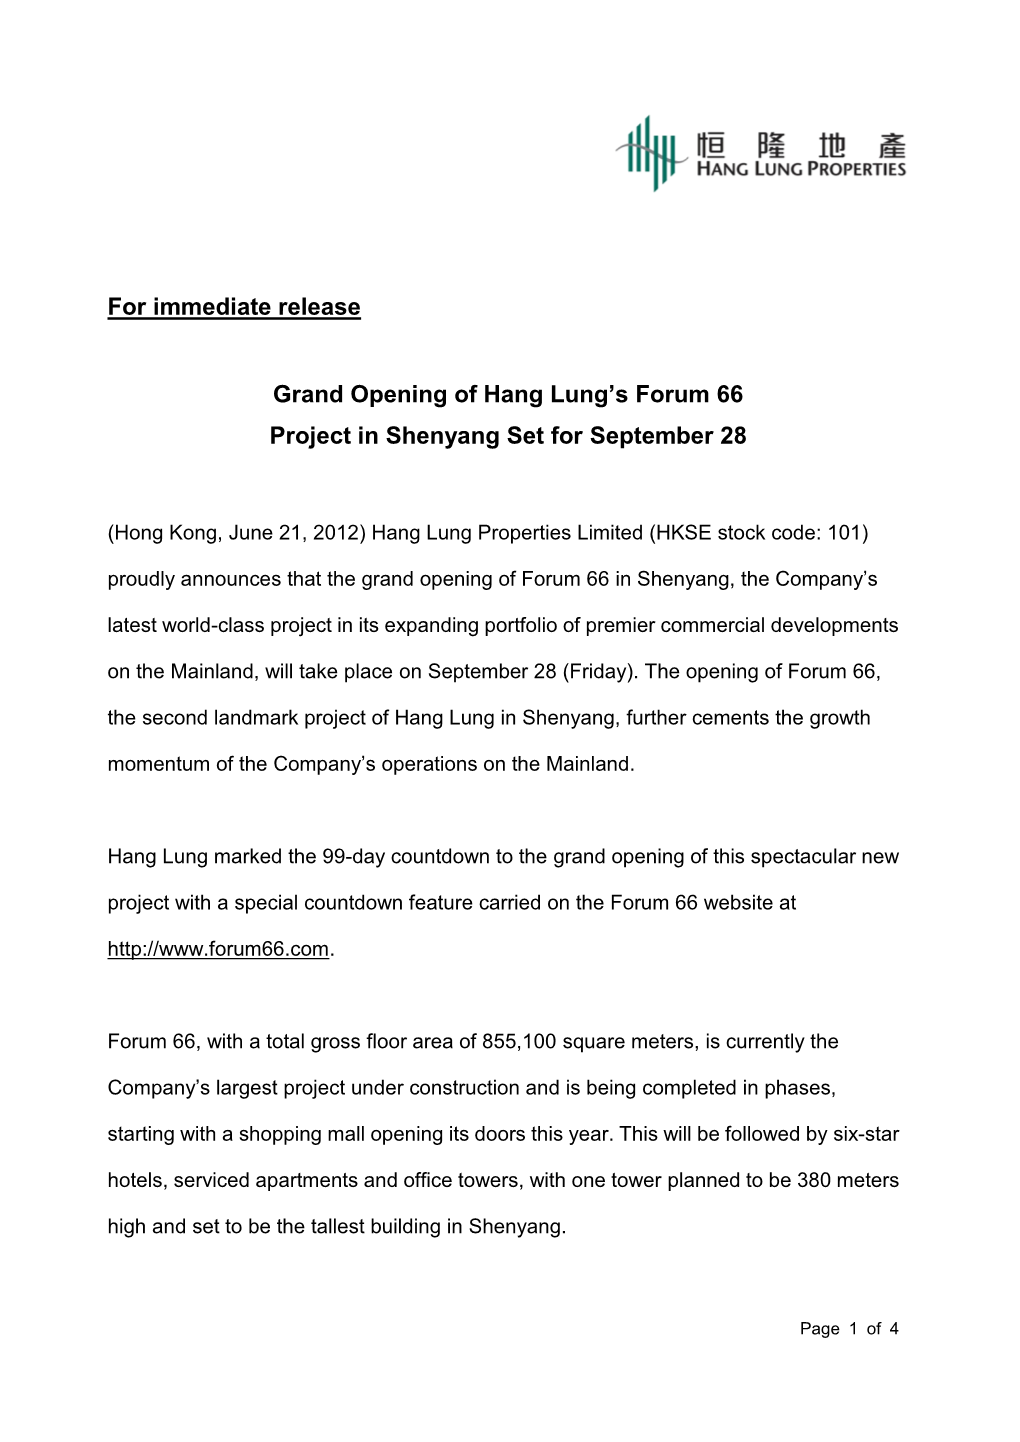 Grand Opening of Hang Lung's Forum 66 Project in Shenyang Set For